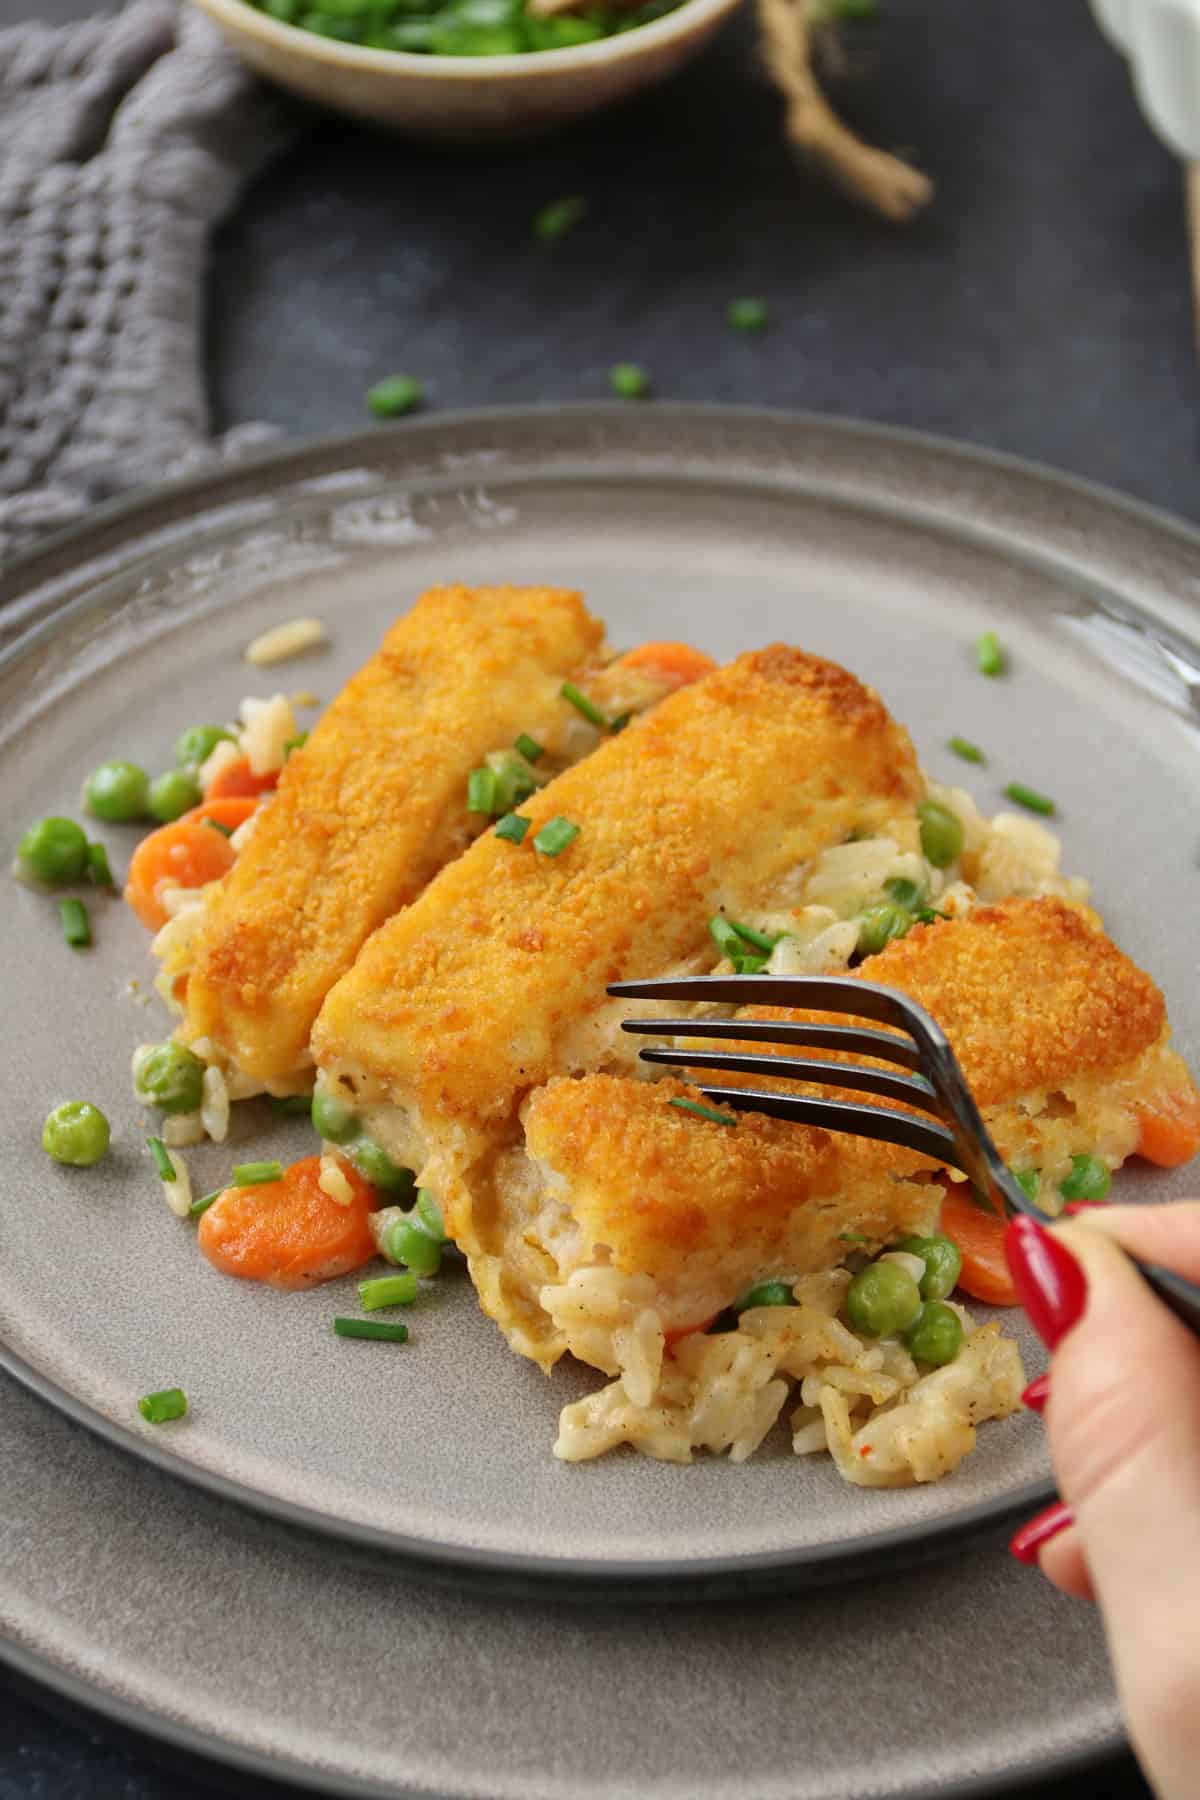 One hand uses a fork to take a portion of fish stick casserole from a plate containing the dish.